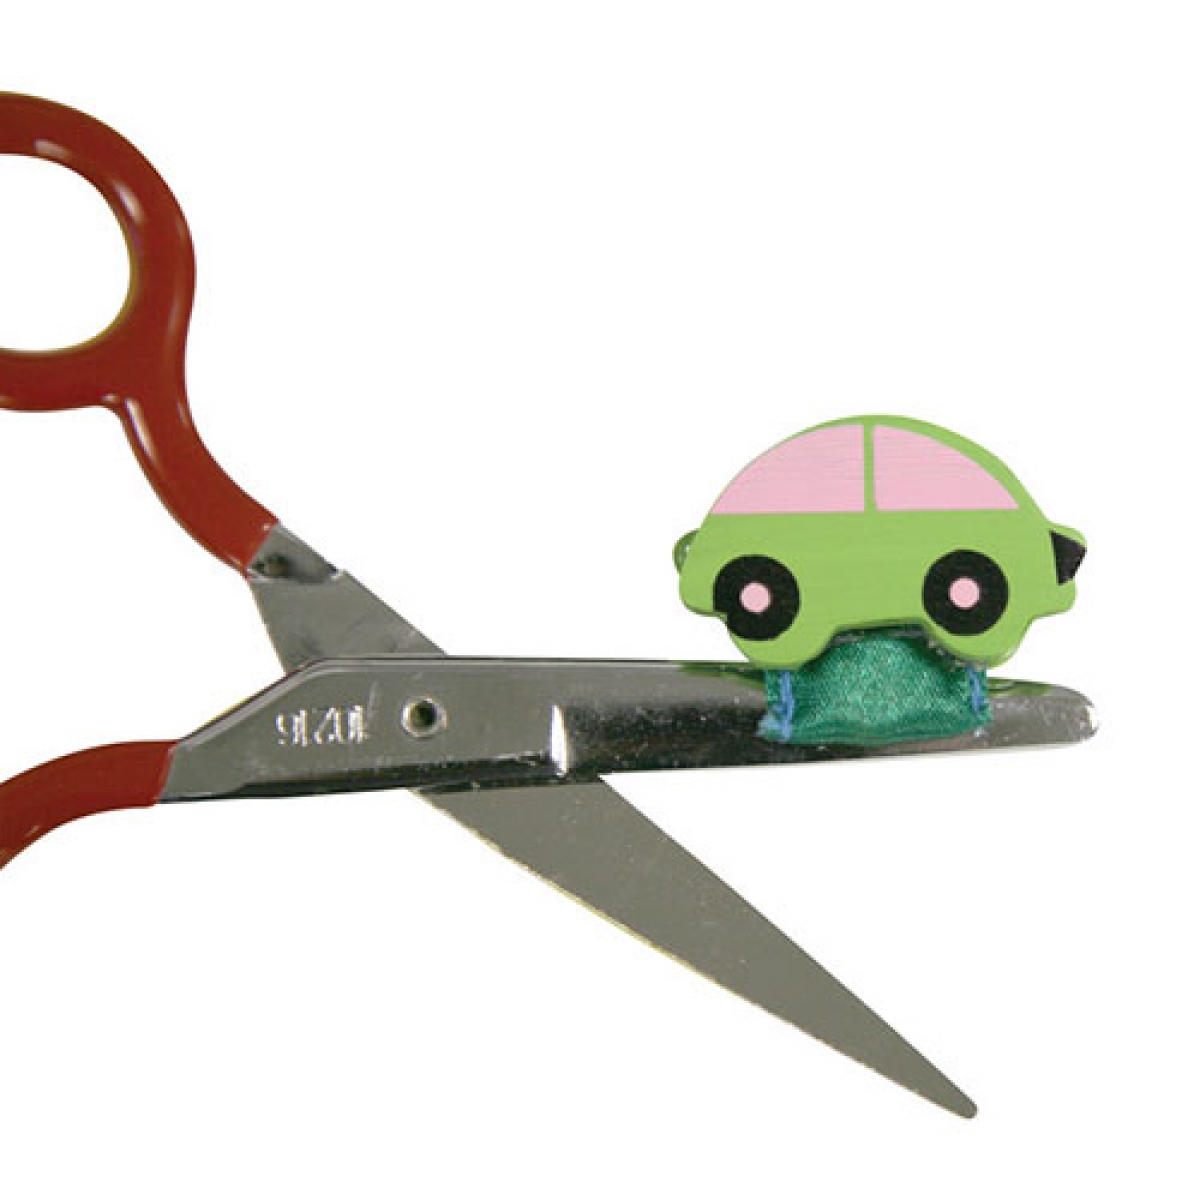 https://www.autism-products.com/wp-content/uploads/Cut-N-Cruise-Magnetic-Car-for-Metal-Scissors-Pack-of-3-1200x1200.jpg